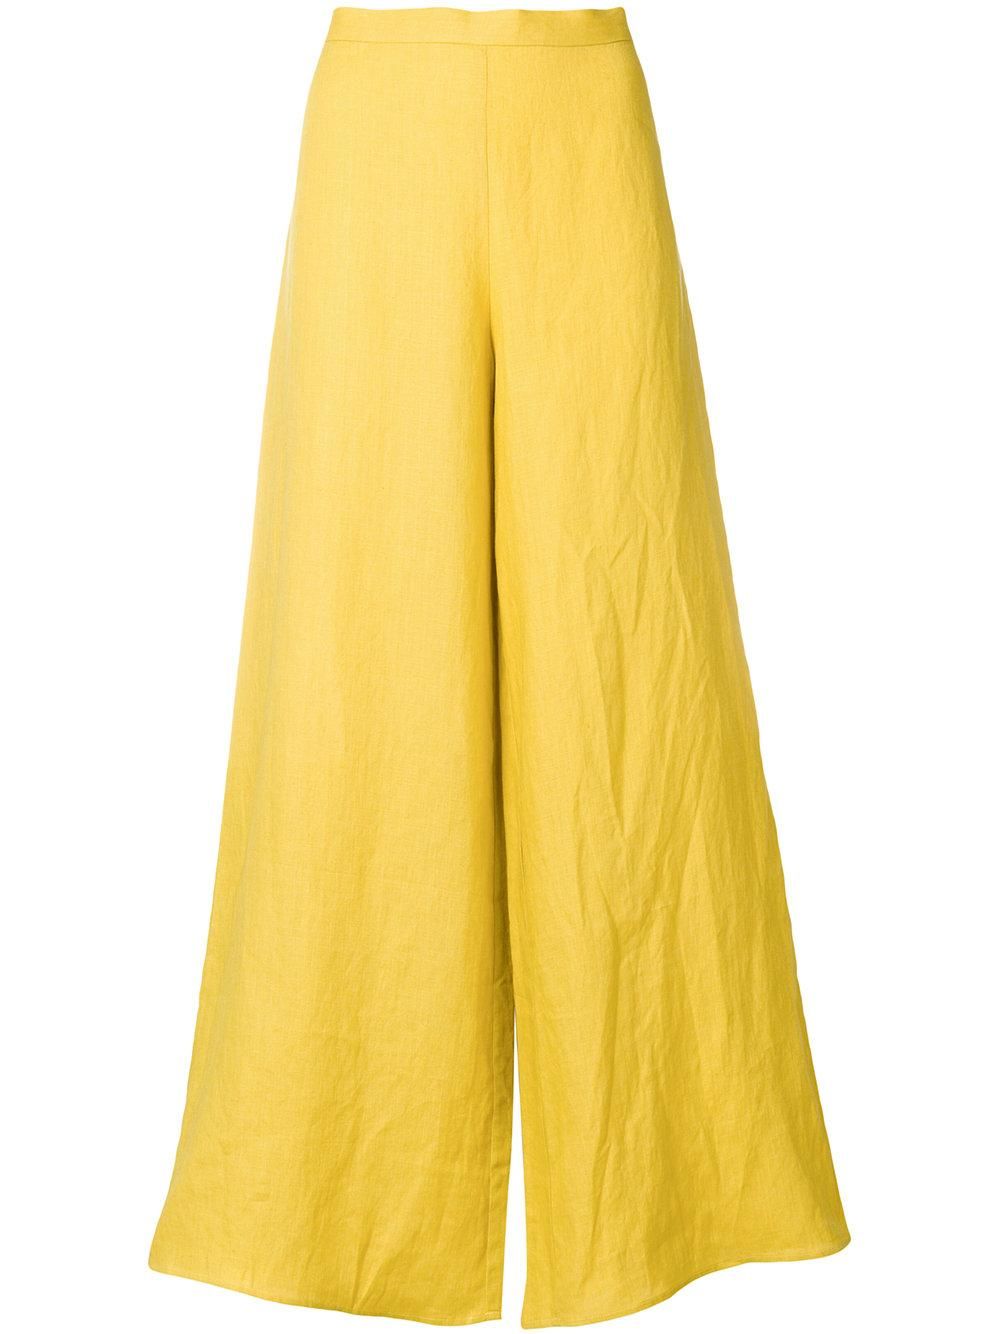 9 Yellow Outfits for Summer That'll Make You Happier | Who What Wear